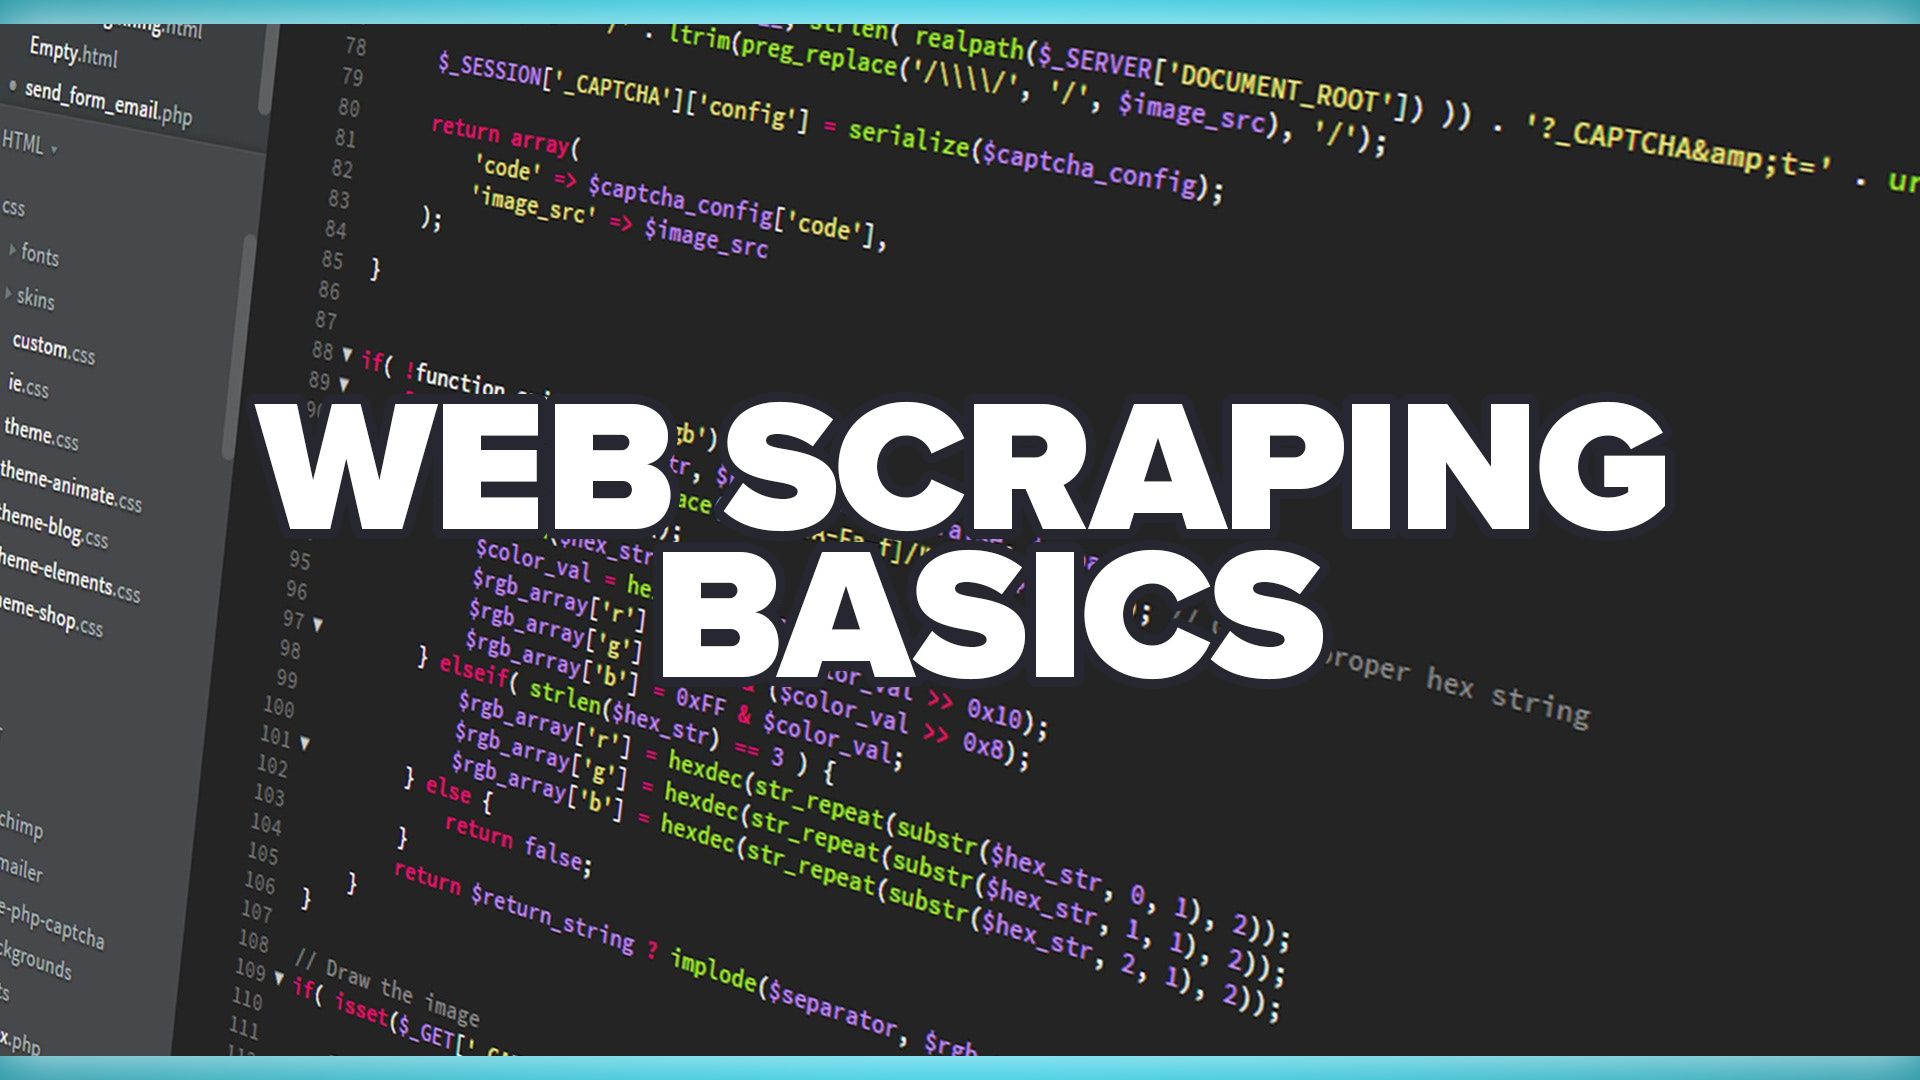 Web Scraping basics: What you need to know to get started.